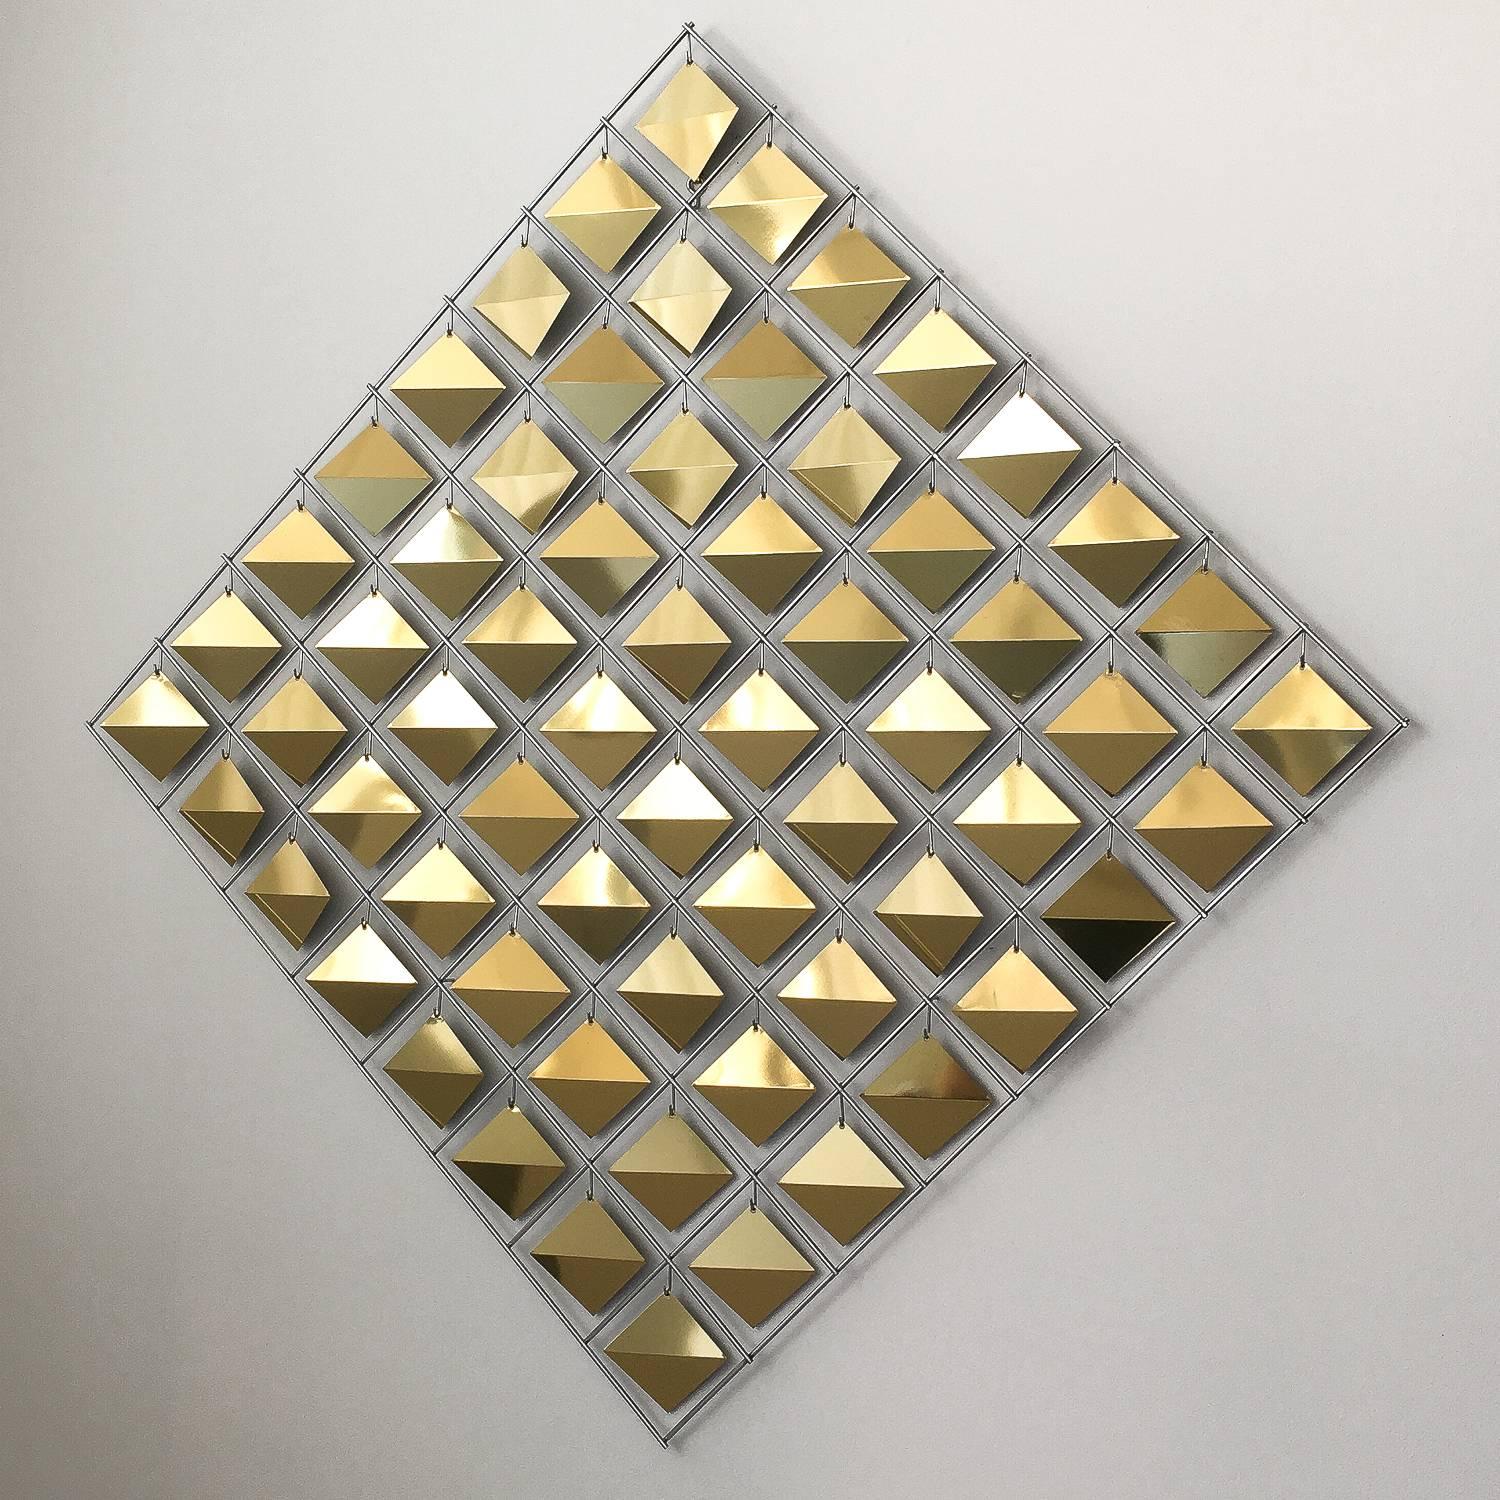 Curtis Jere brass diamond shaped wall sculpture. 64 faceted brass diamonds are suspended from a chrome framework. The 3